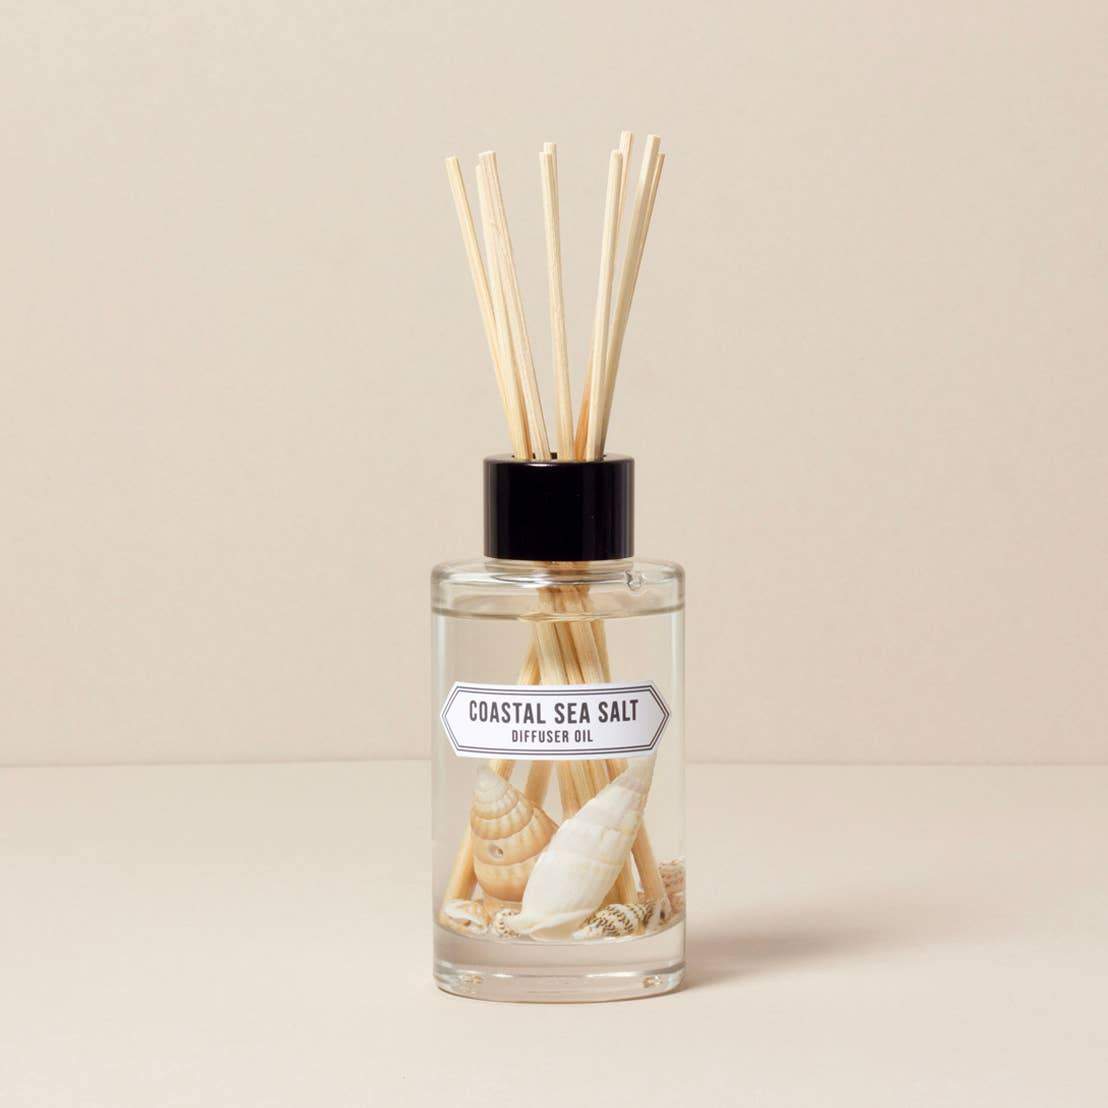 A Norfolk Natural Living reed diffuser oil bottle labeled "Coastal - Sea Salt" with multiple sticks inserted, set against a plain beige background. The bottle features a design with seashells.